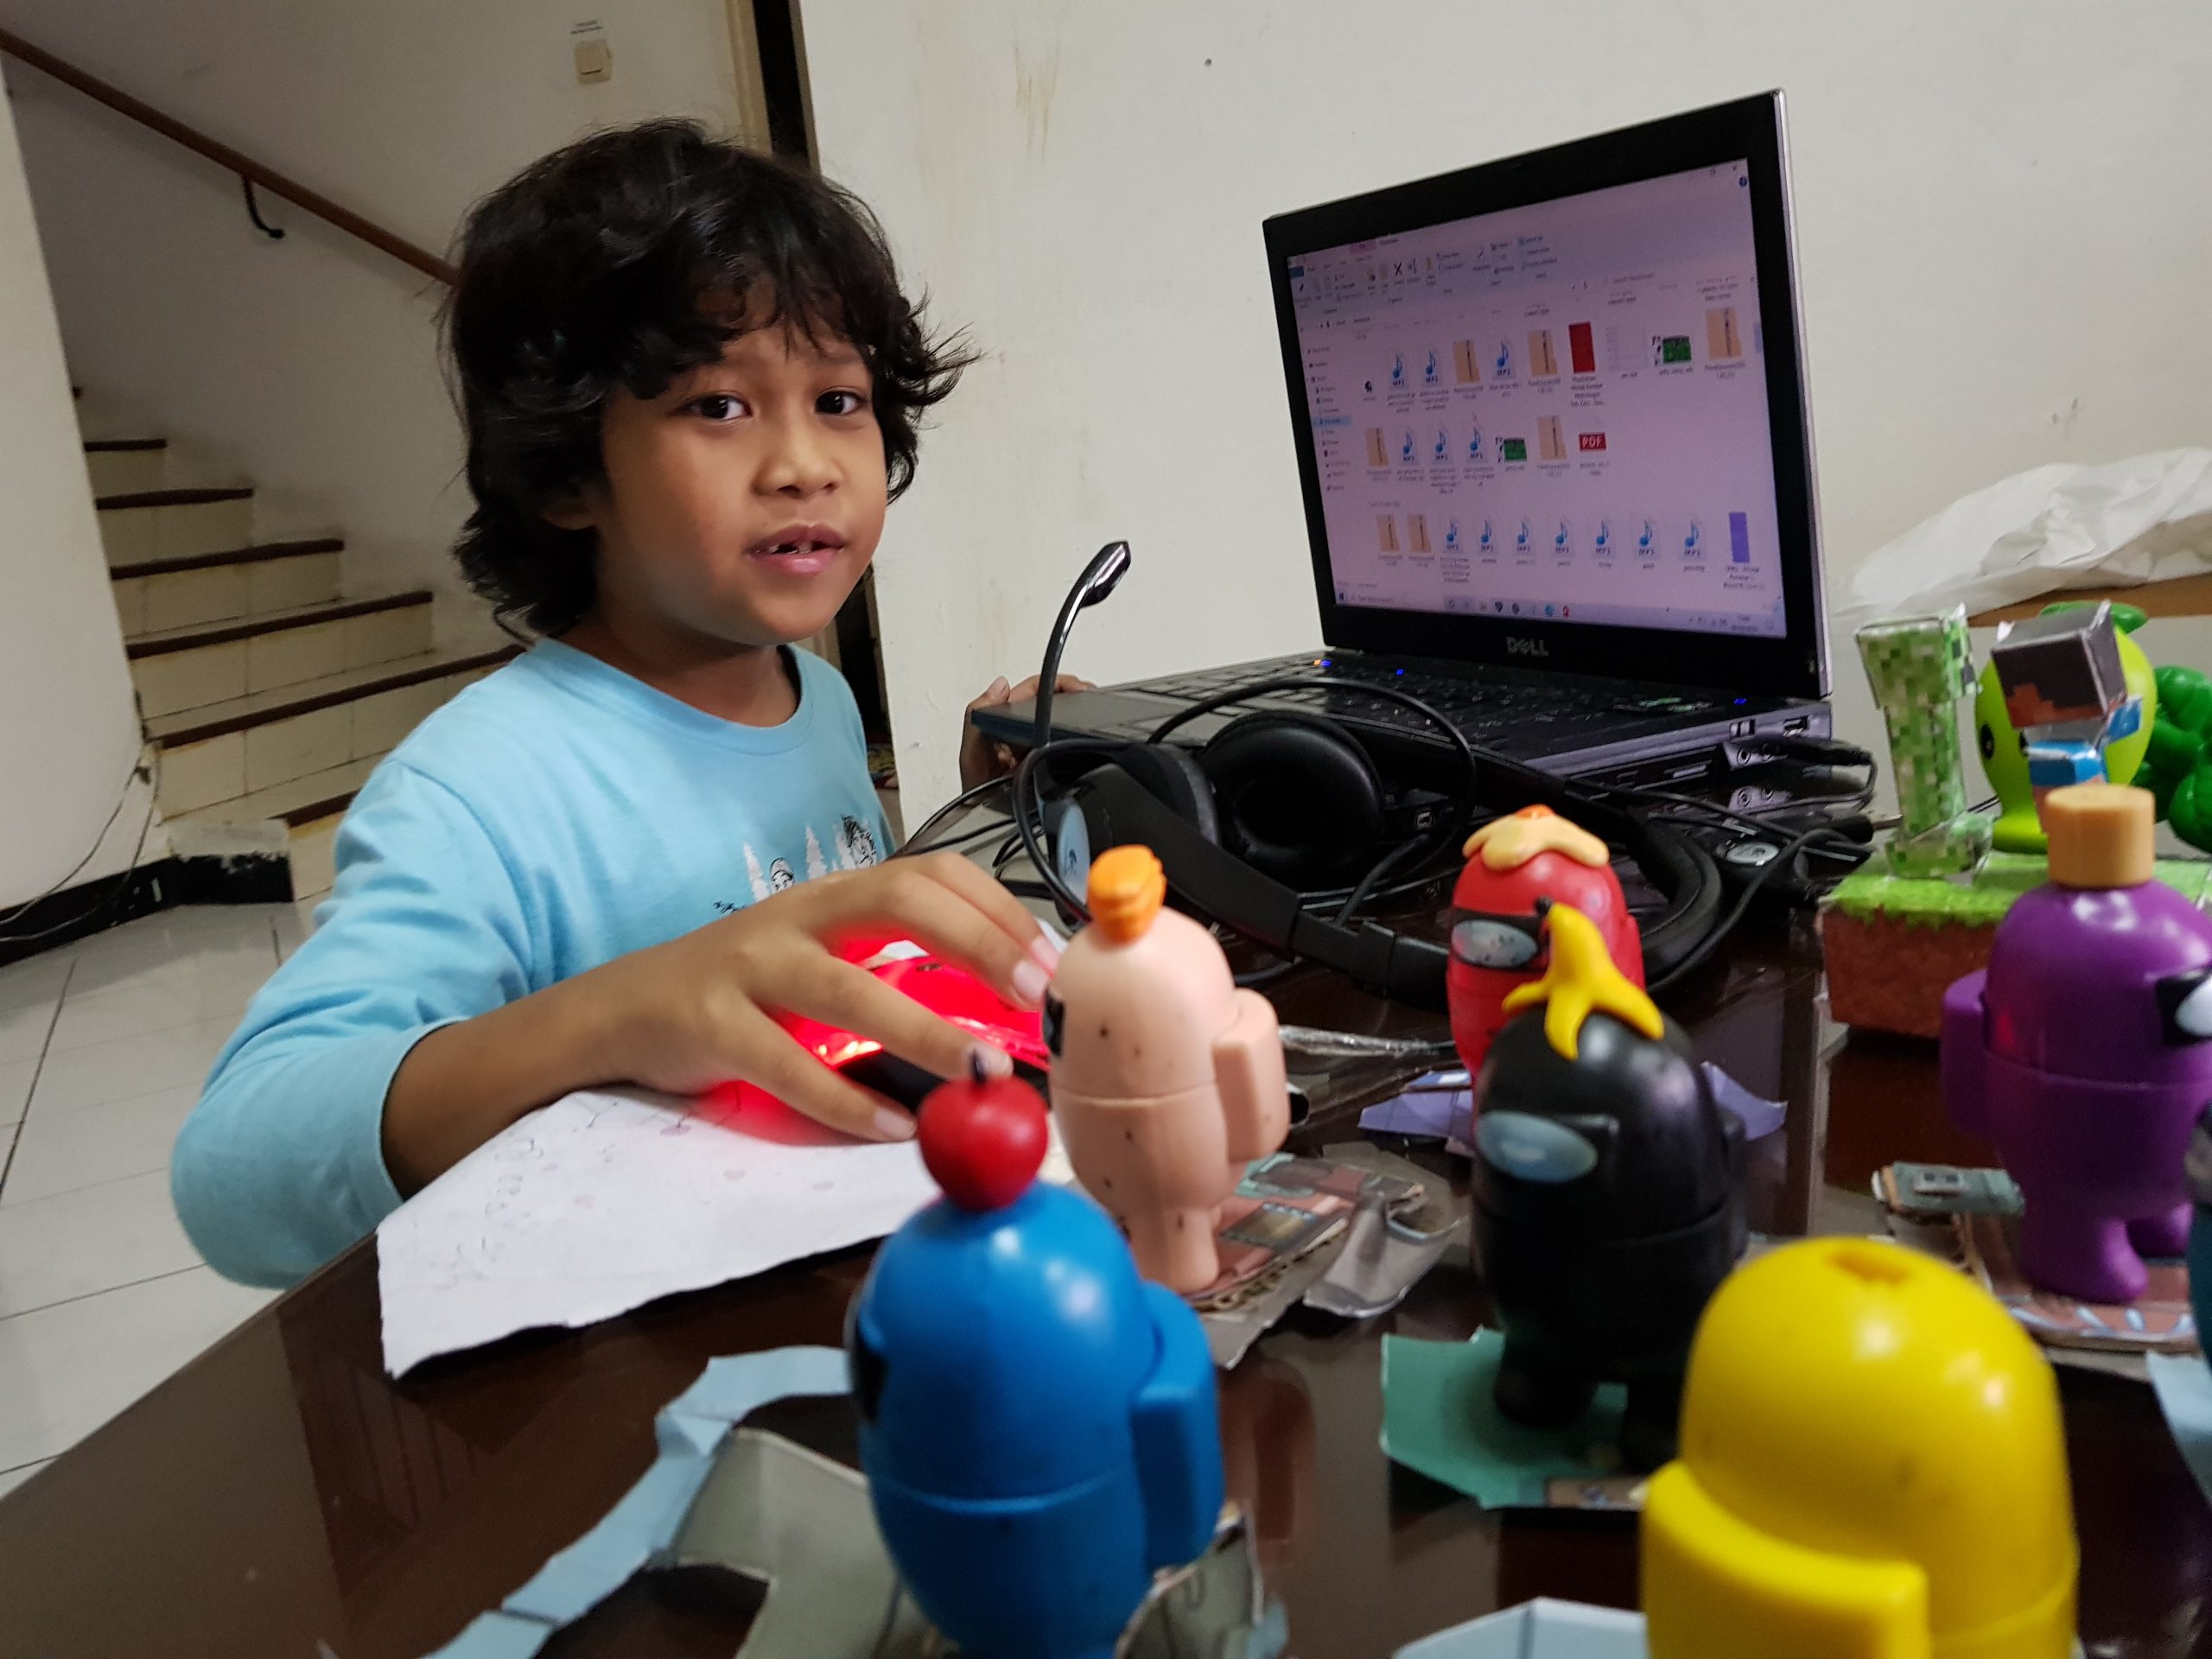 Indonesian 9-year-old boy fluently speaks English from early age autodidactically